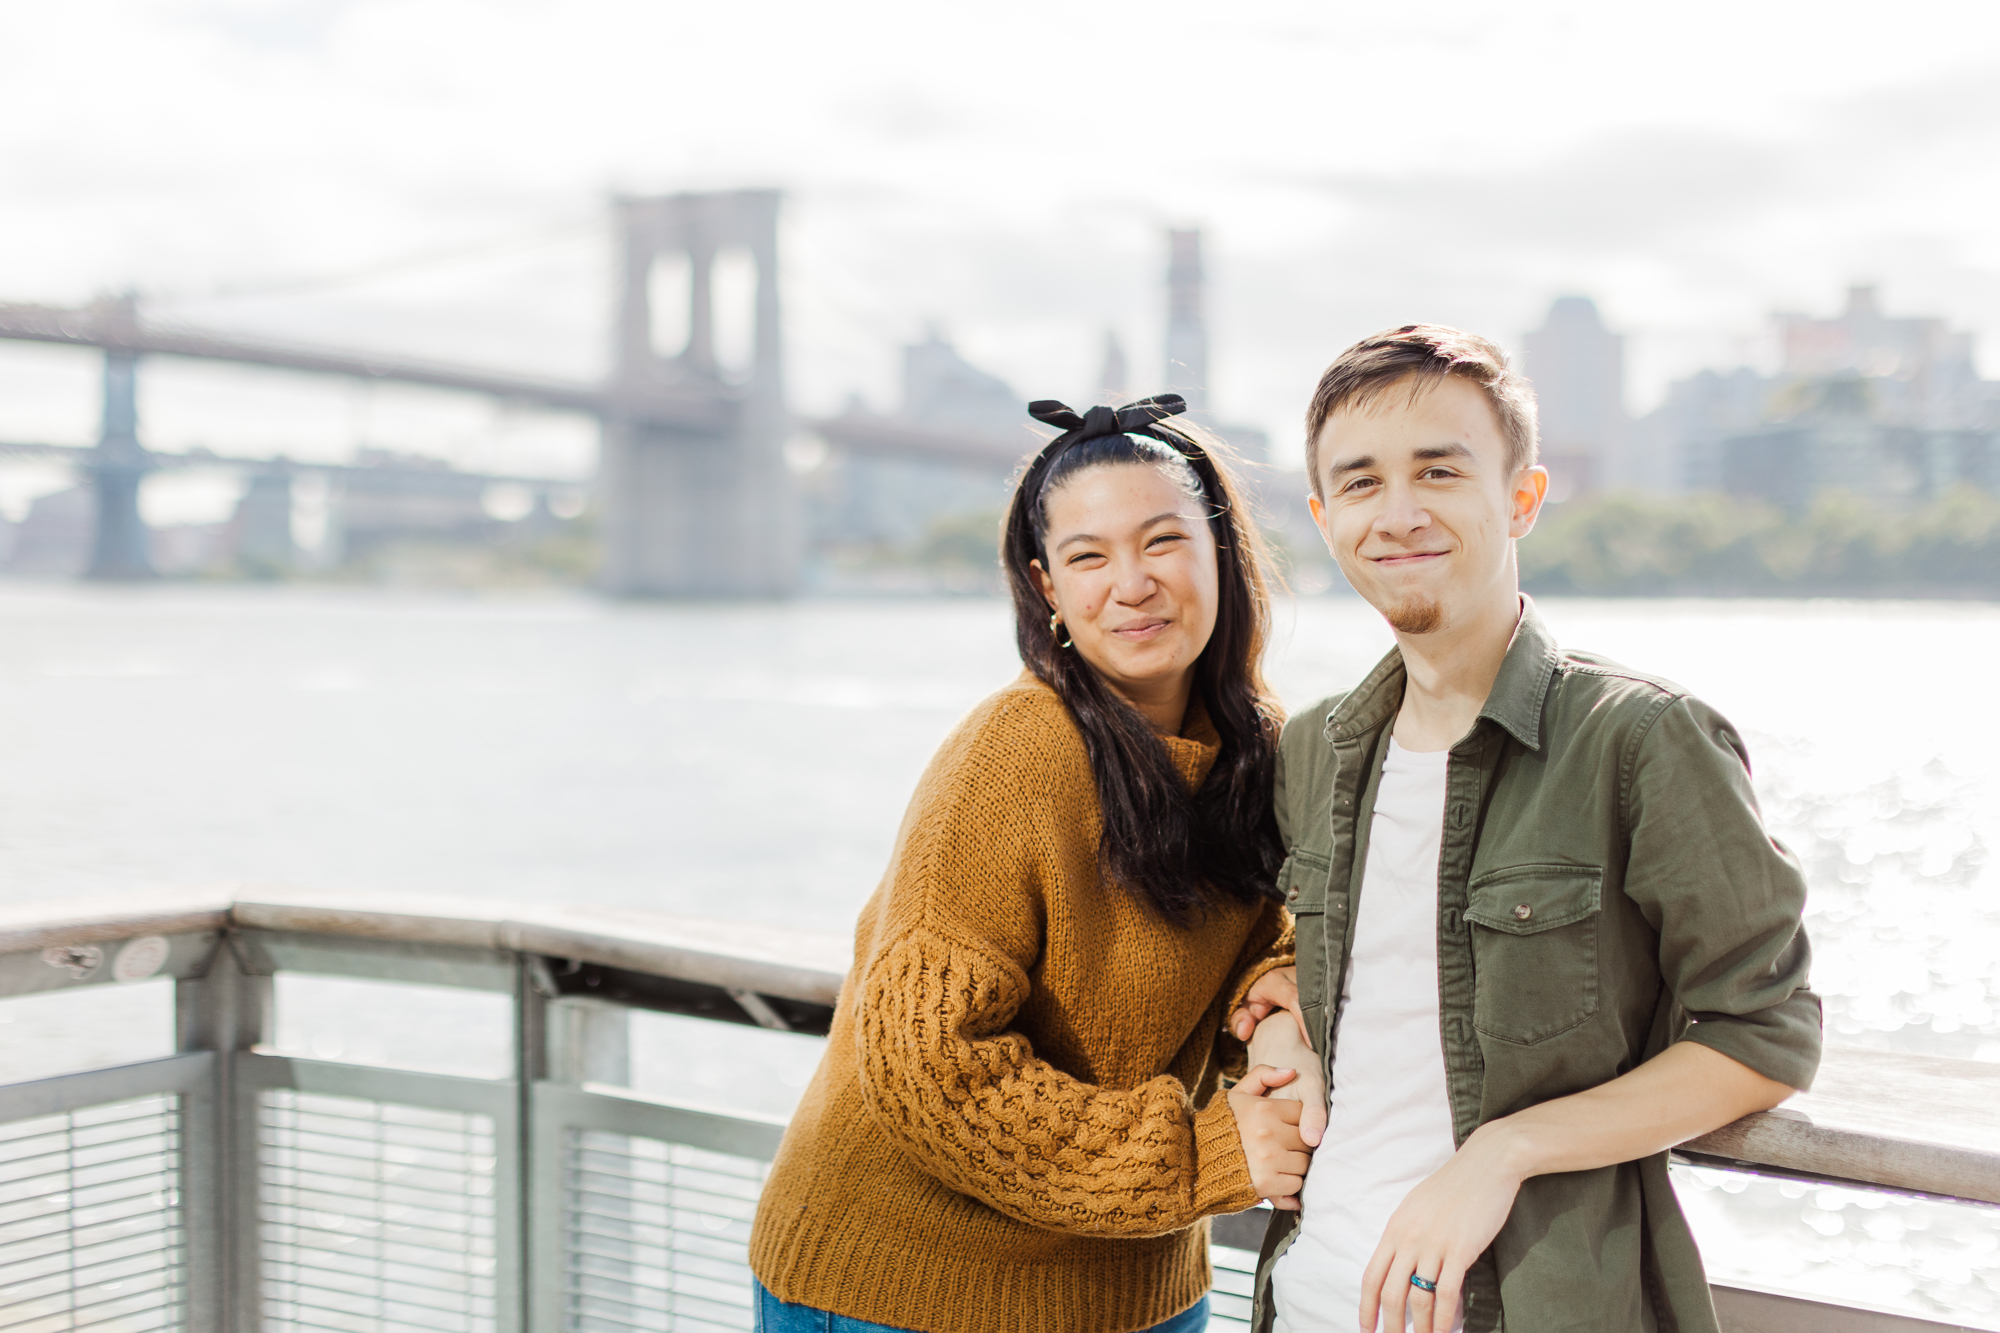 Bright South Street Seaport Pier 17 Engagement Photography